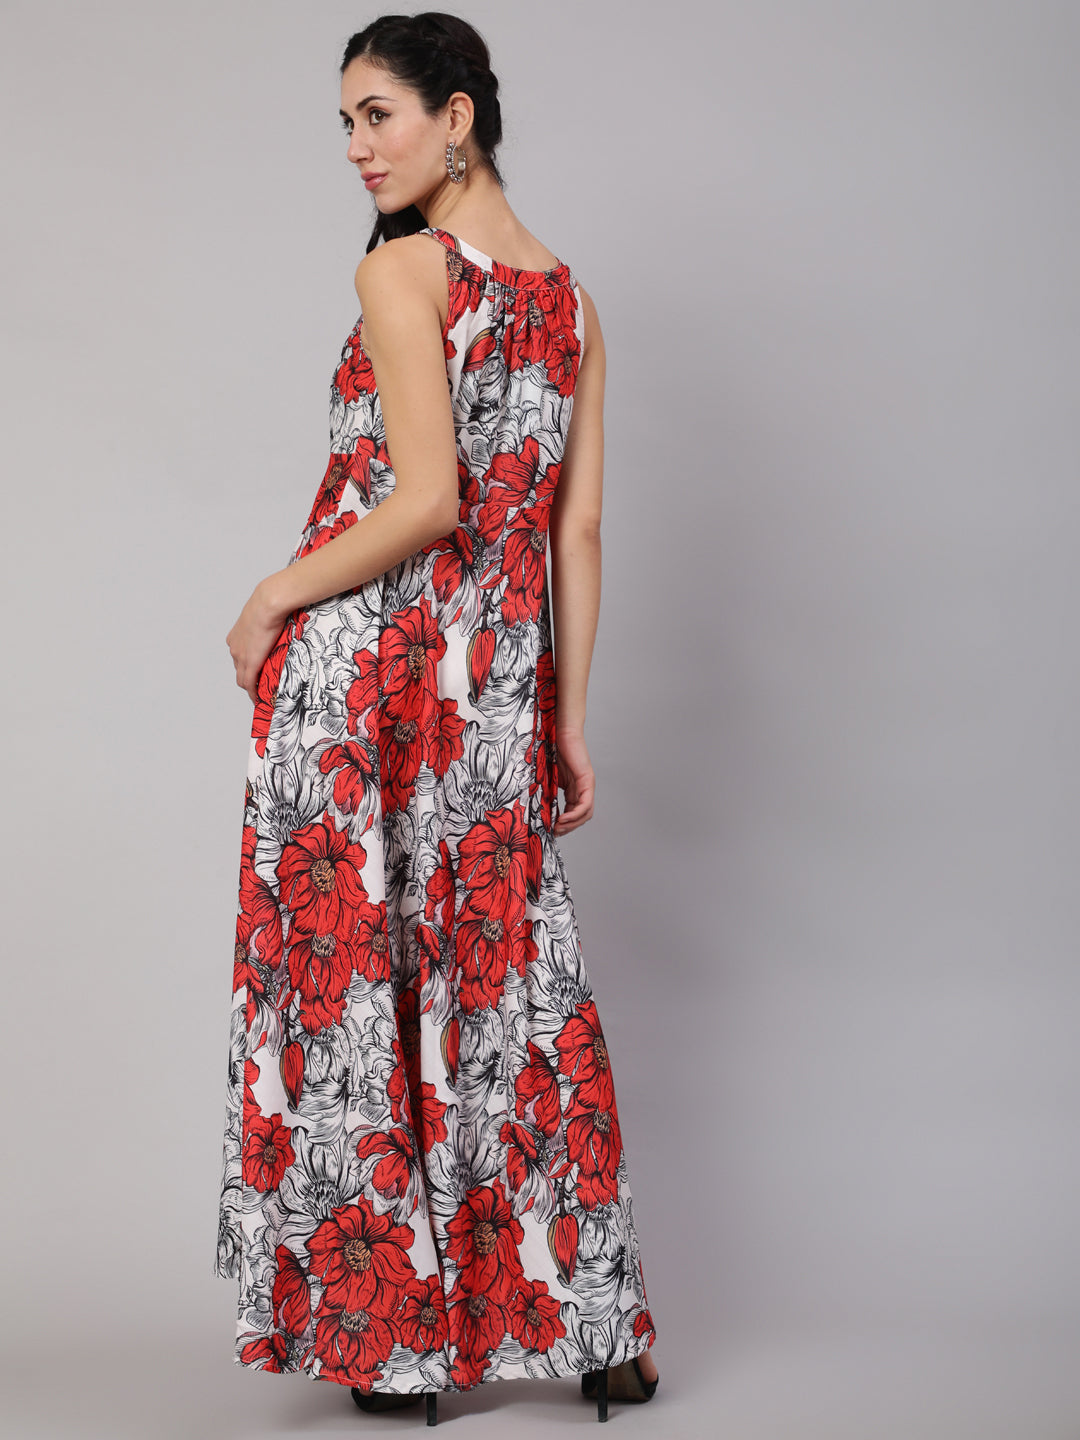 White & Red Floral Print Maxi Dress